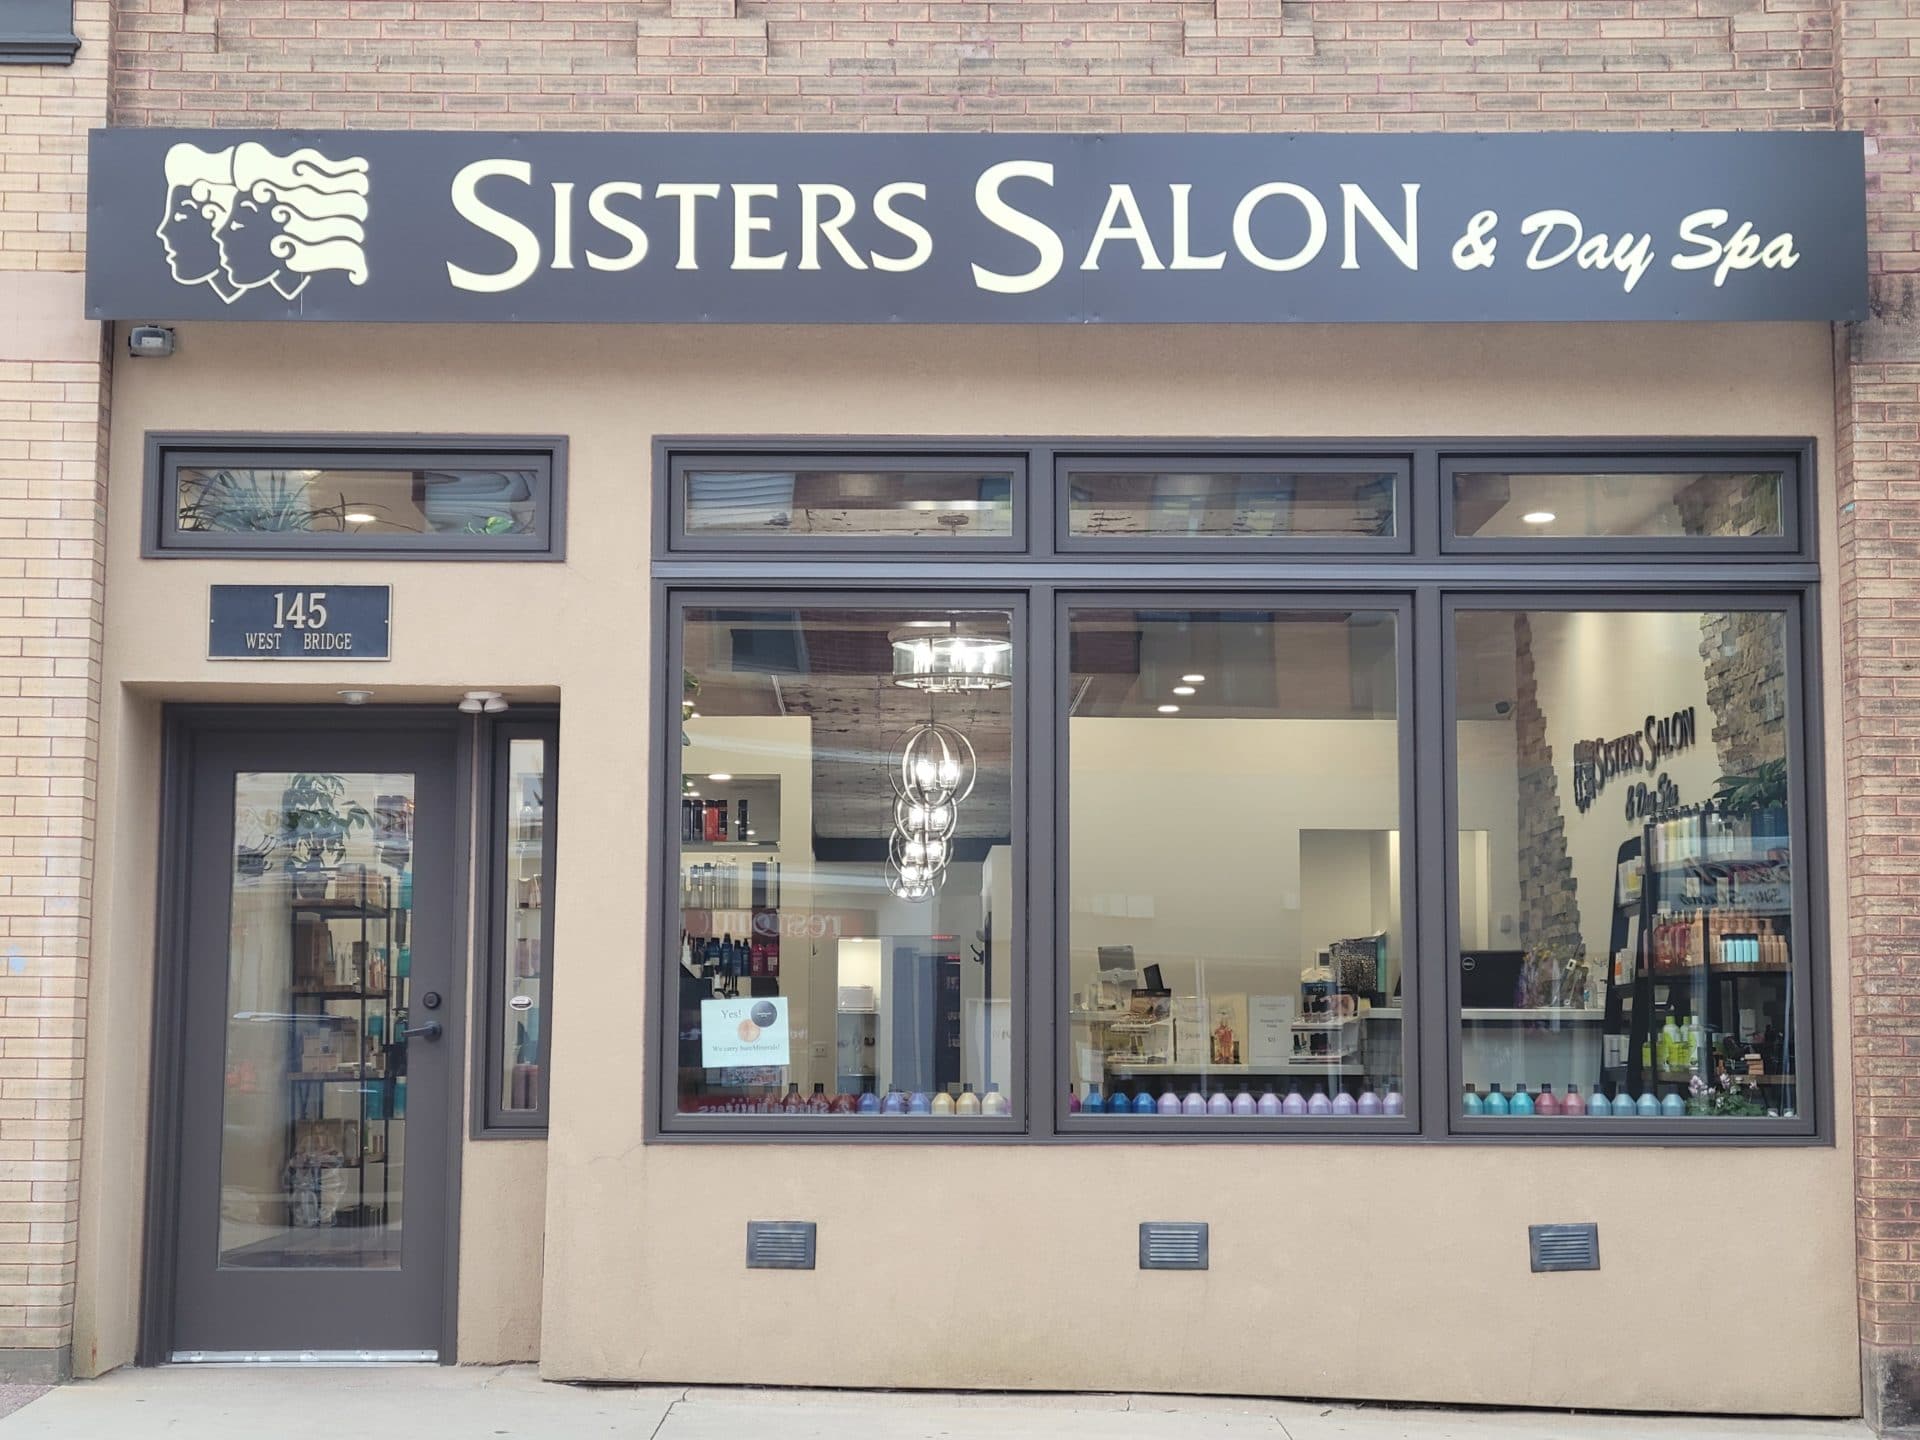 Sisters Salon & Day Spa Storefront